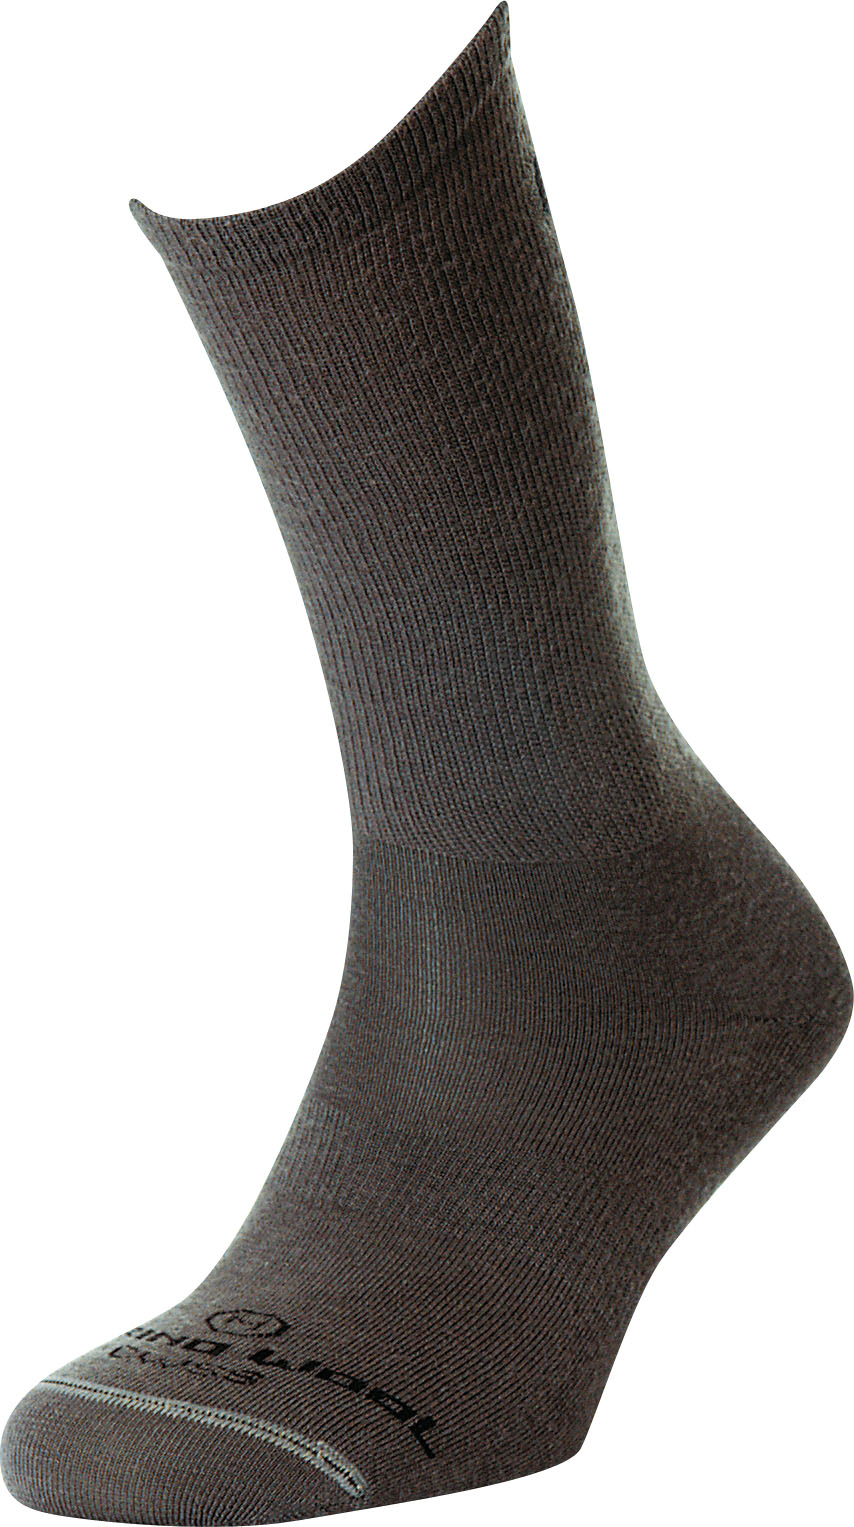 Image CWSS - Cold Weather Socks System - Brown - M